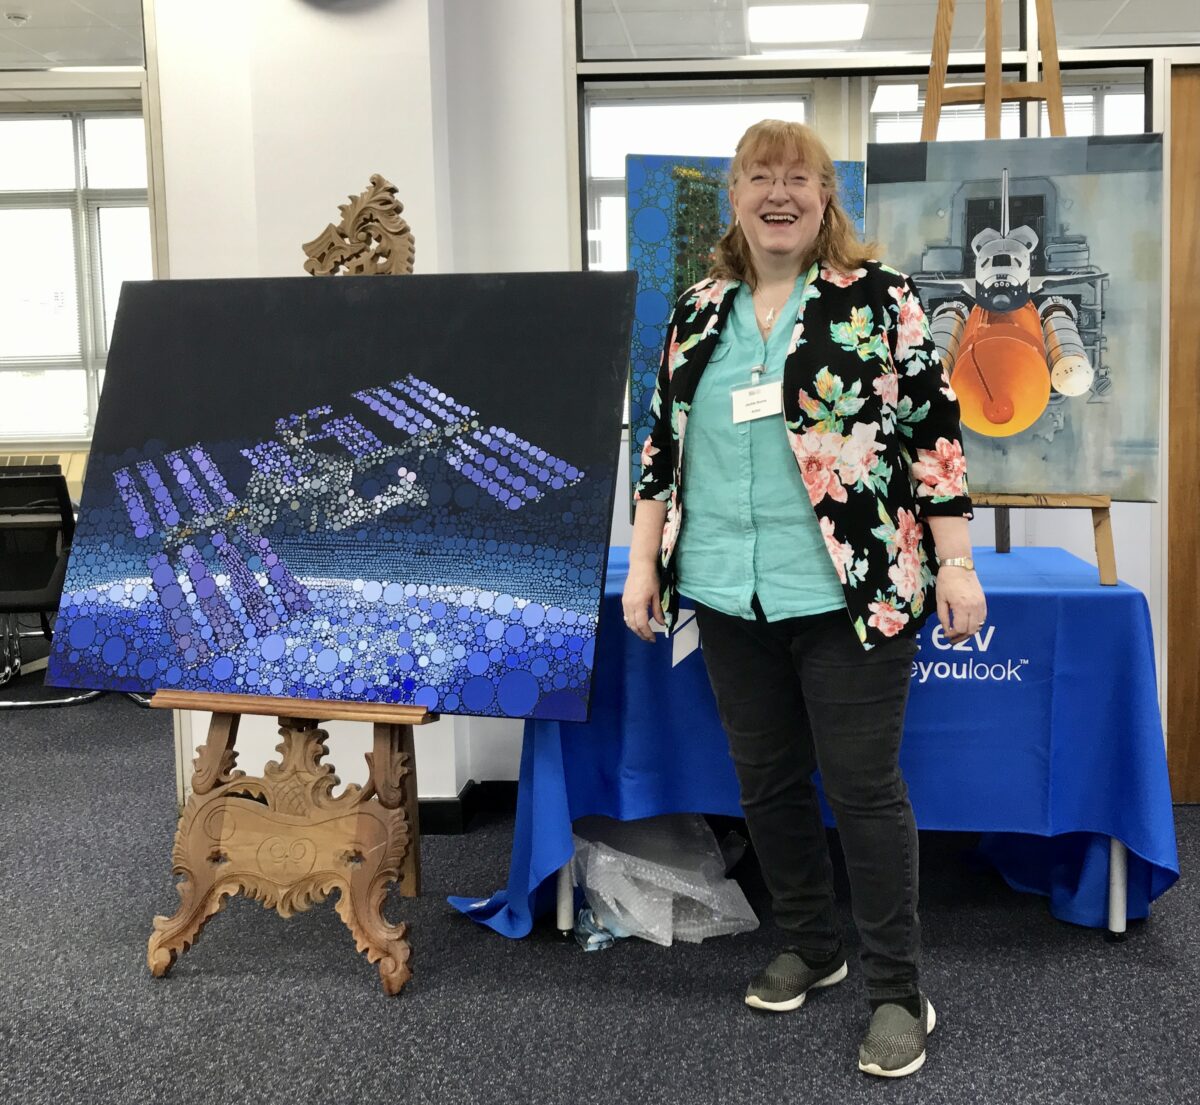 A photograph of Jackie Burns, a white woman with light hair, standing next to some of her artwork on display. To her left is an image of a space satellite made of circles in various shades of blue, purple, white and black. Behind her is an obscured image made of blue and green circles. To her right is a picture of a gray-white space shuttle coming out of an bay entrance. Below the space shuttle is a striking orange cylinder.